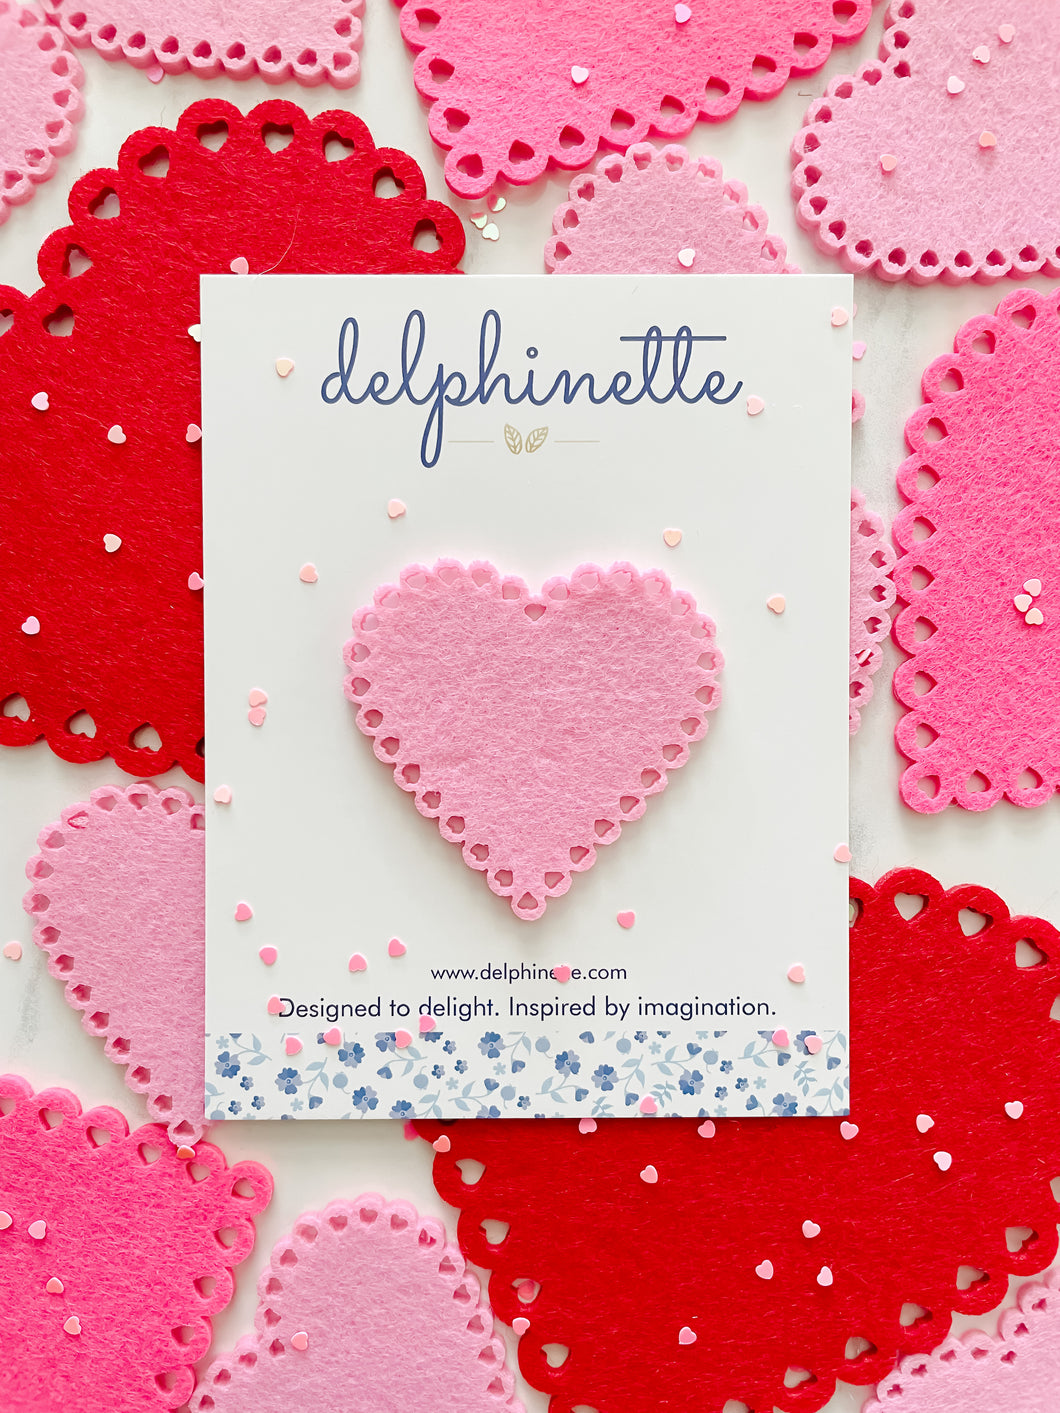 delphinette handmade felt little girl/baby girl hair accessory - a vintage inspired pink felt heart with little heart cutouts that can be customized as a hair clip, headband or hair tie. Handmade in Canada. 